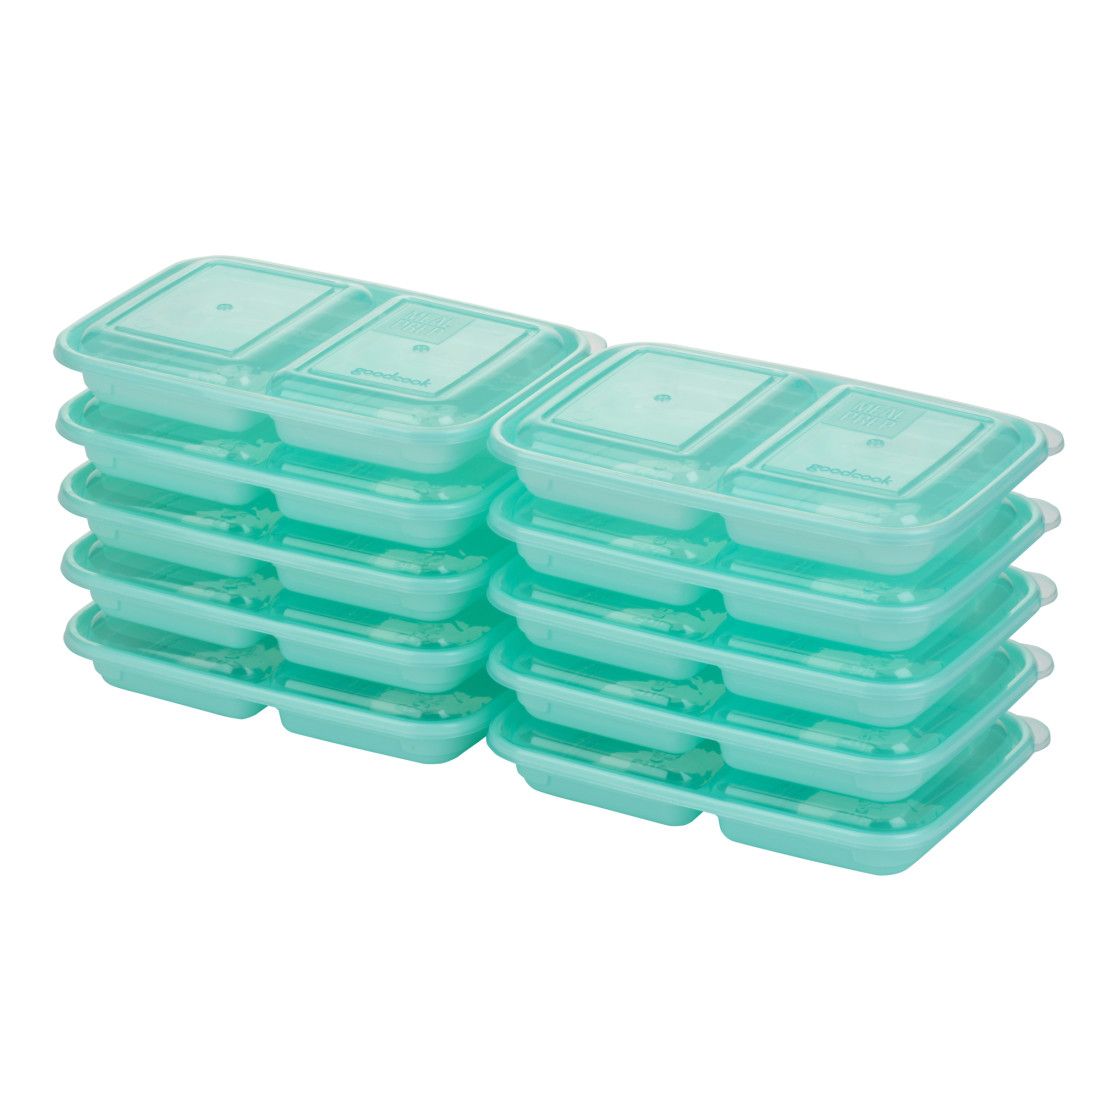 GoodCook Meal Prep 1-Compartment Food Storage Containers, 10 Pack